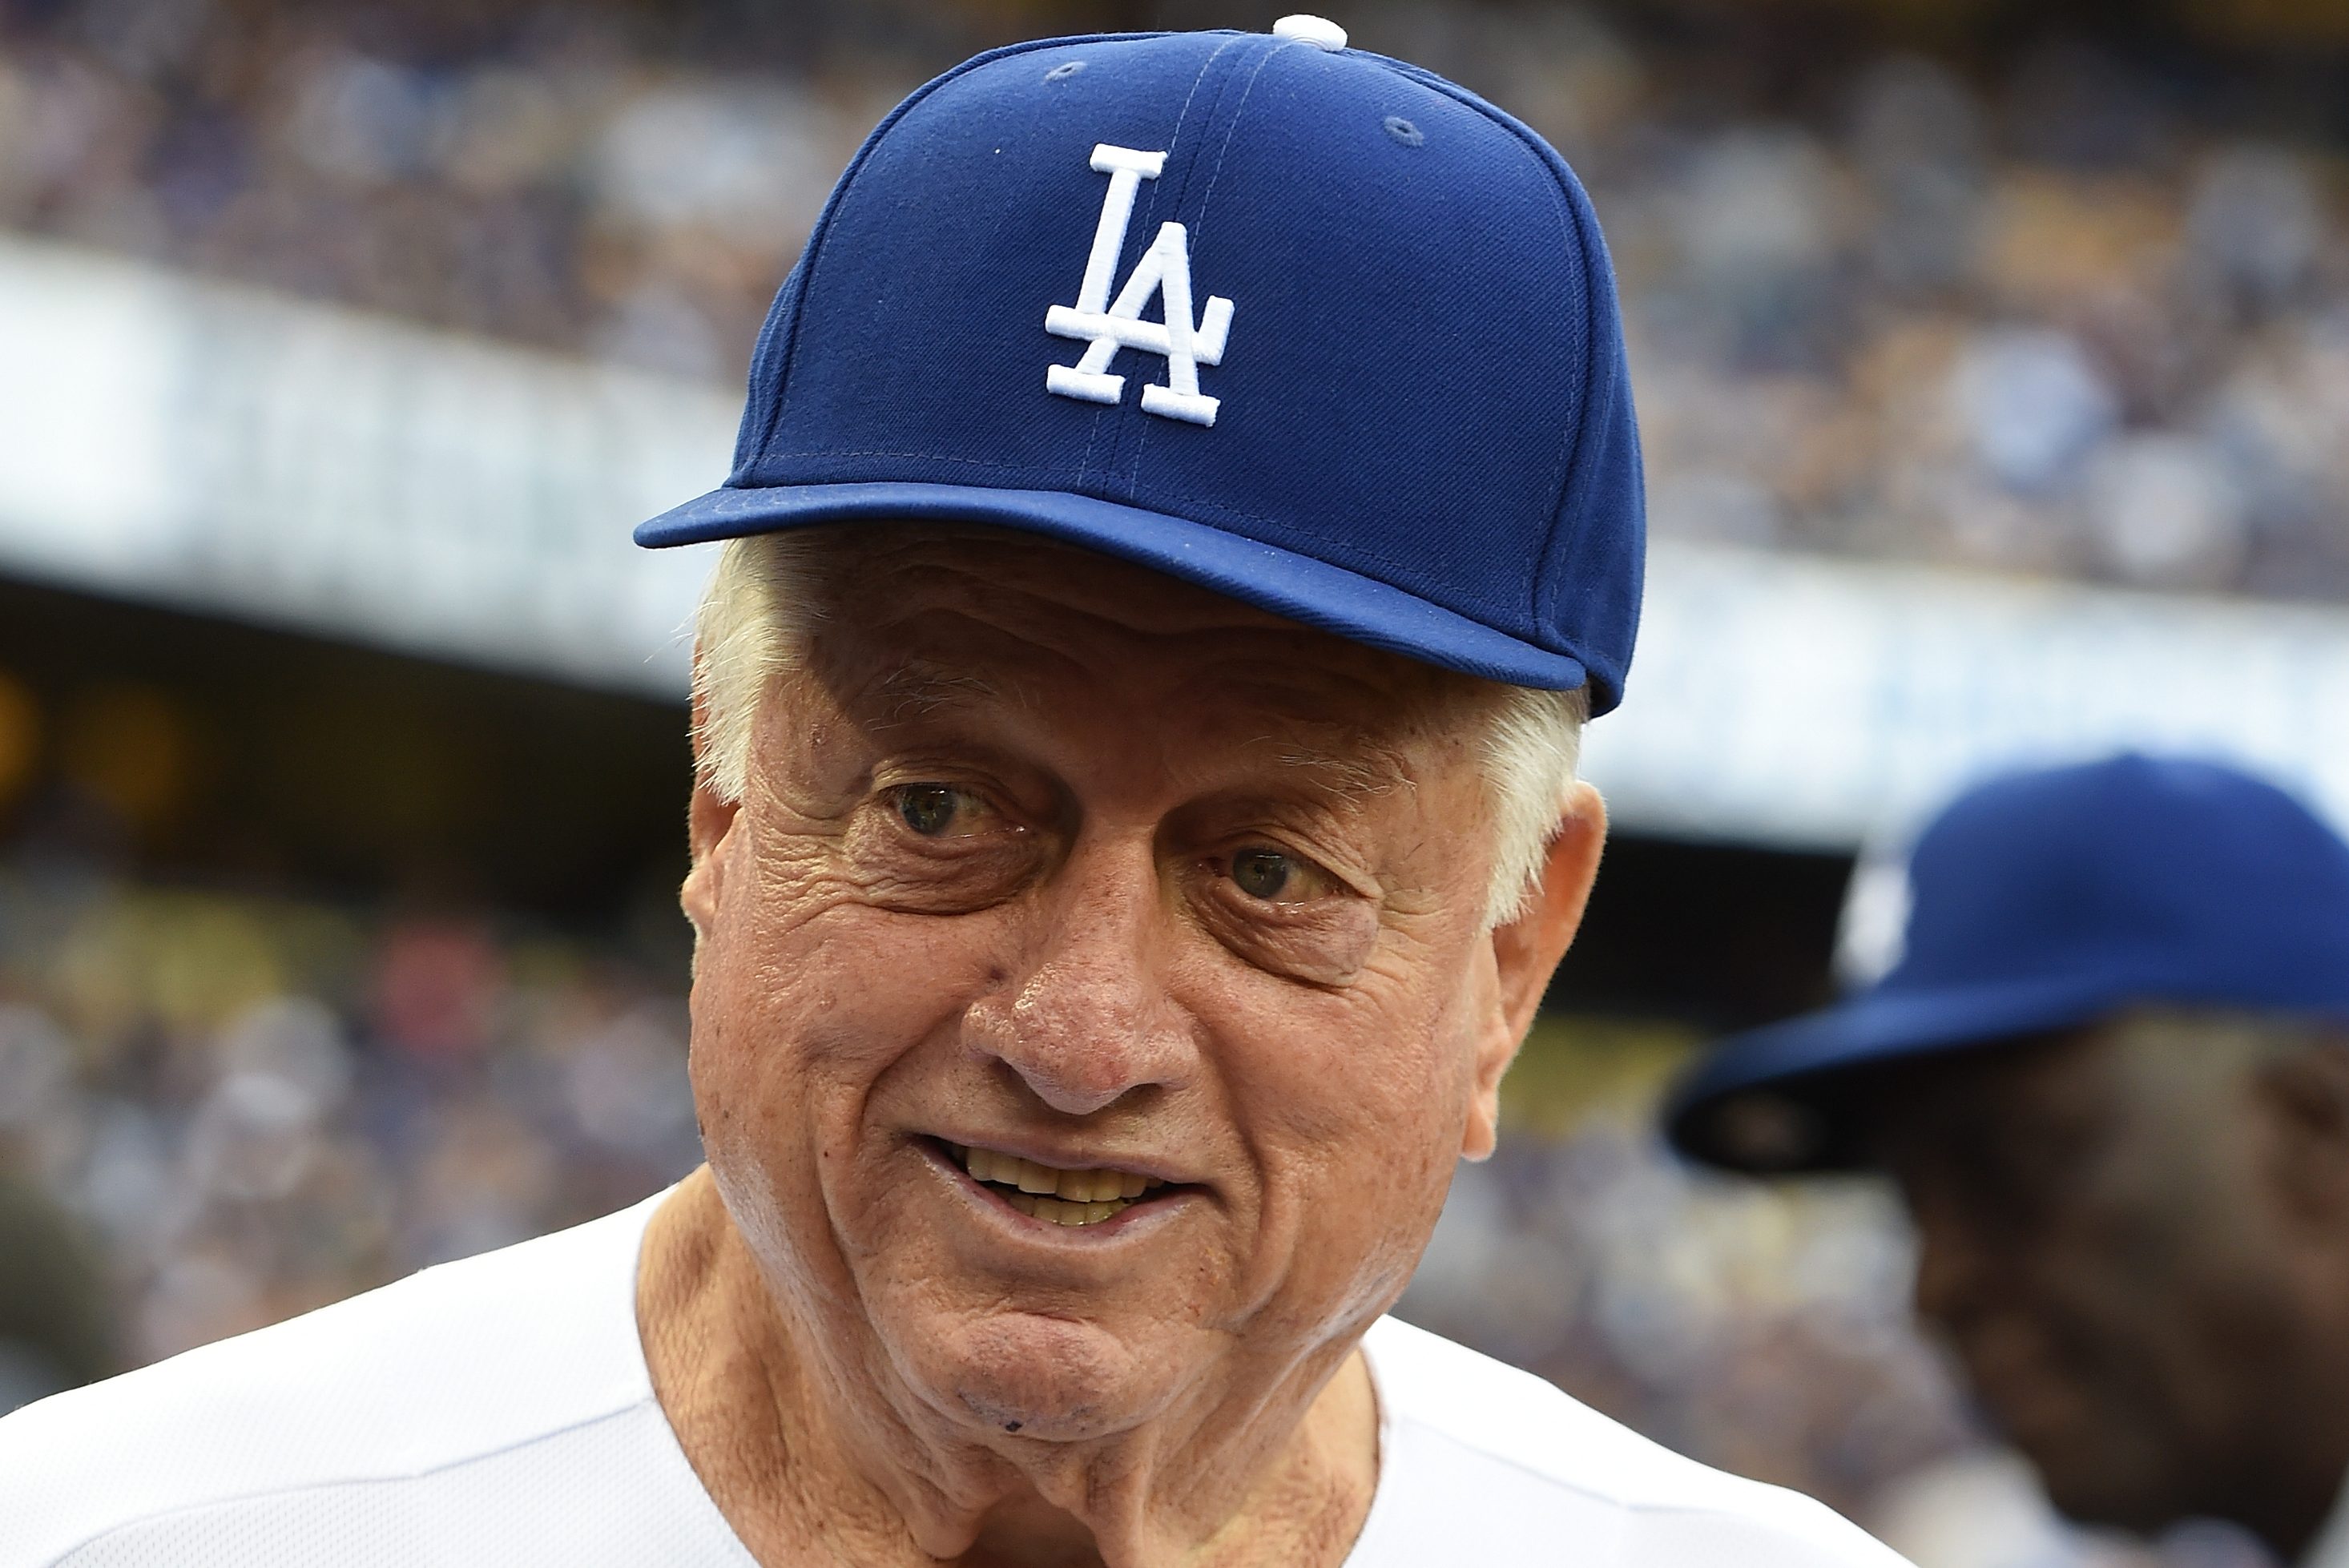 Dodgers: Tommy Lasorda's ceremony at Dodger Stadium looked incredible